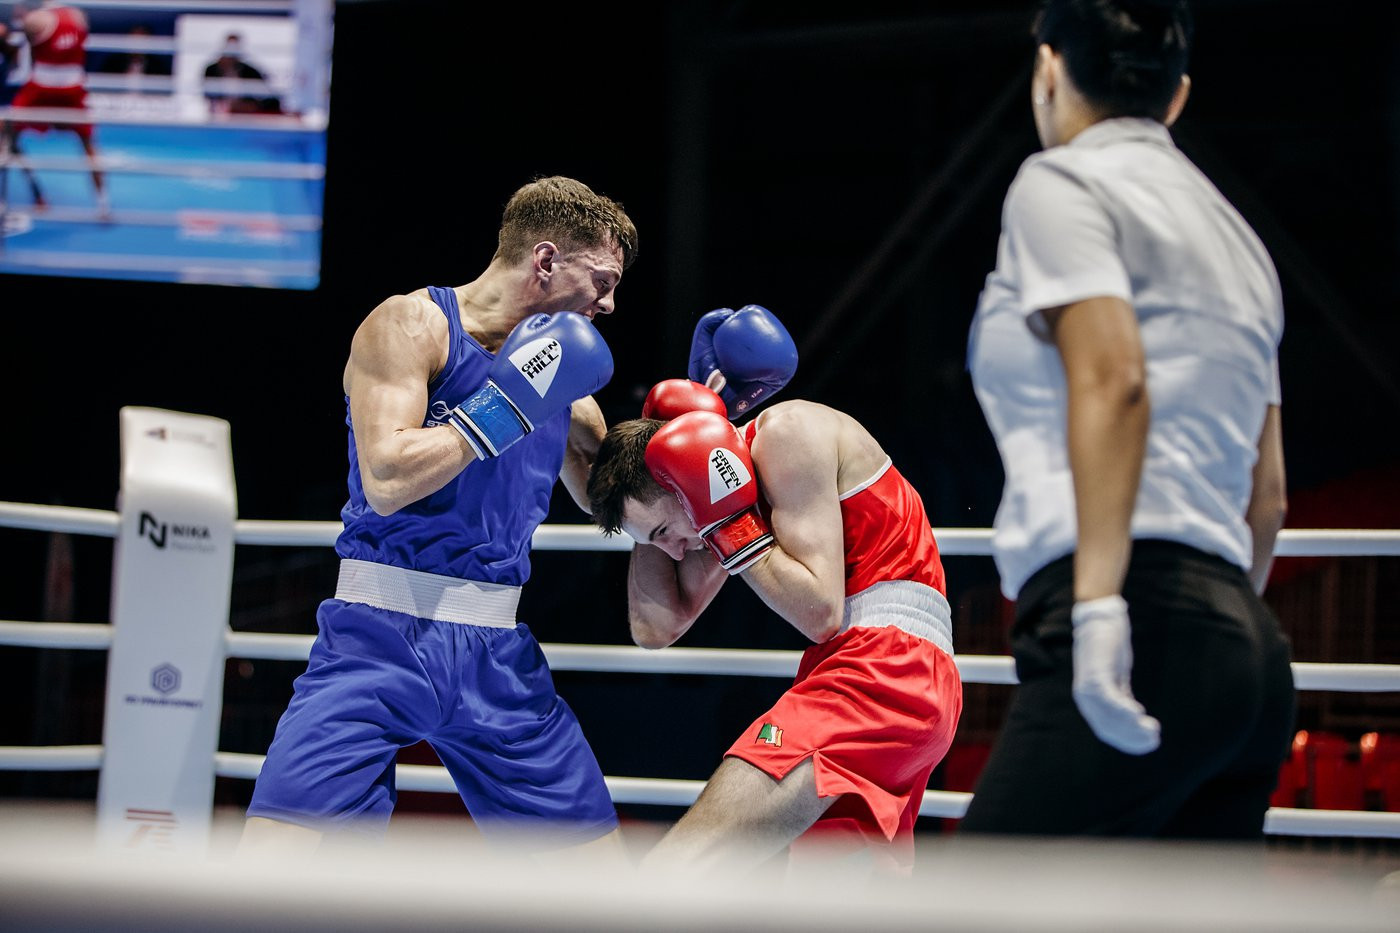 European and Commonwealth champion Pat McCormack of England had a difficult clash with Irish rival Aidan Walsh ©Yekaterinburg 2019